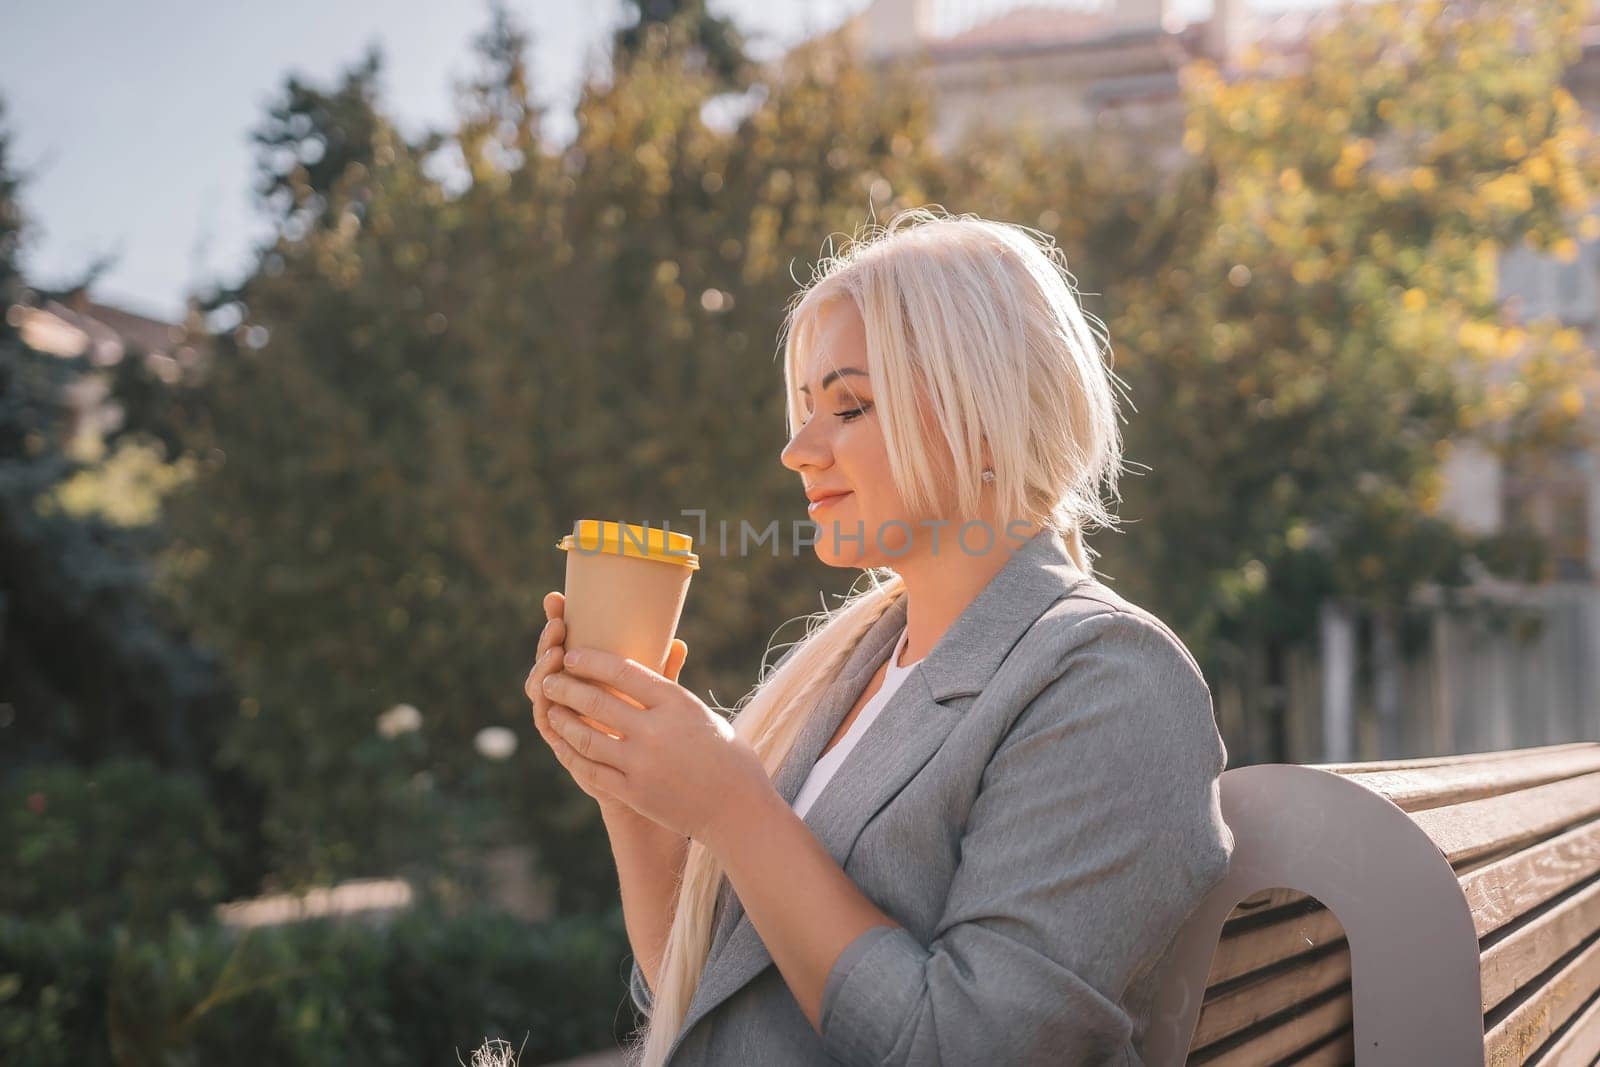 A blonde woman sits on a bench drinking coffee from a yellow cup. She is wearing a gray jacket and has her hair in a ponytail. The scene is peaceful and relaxing